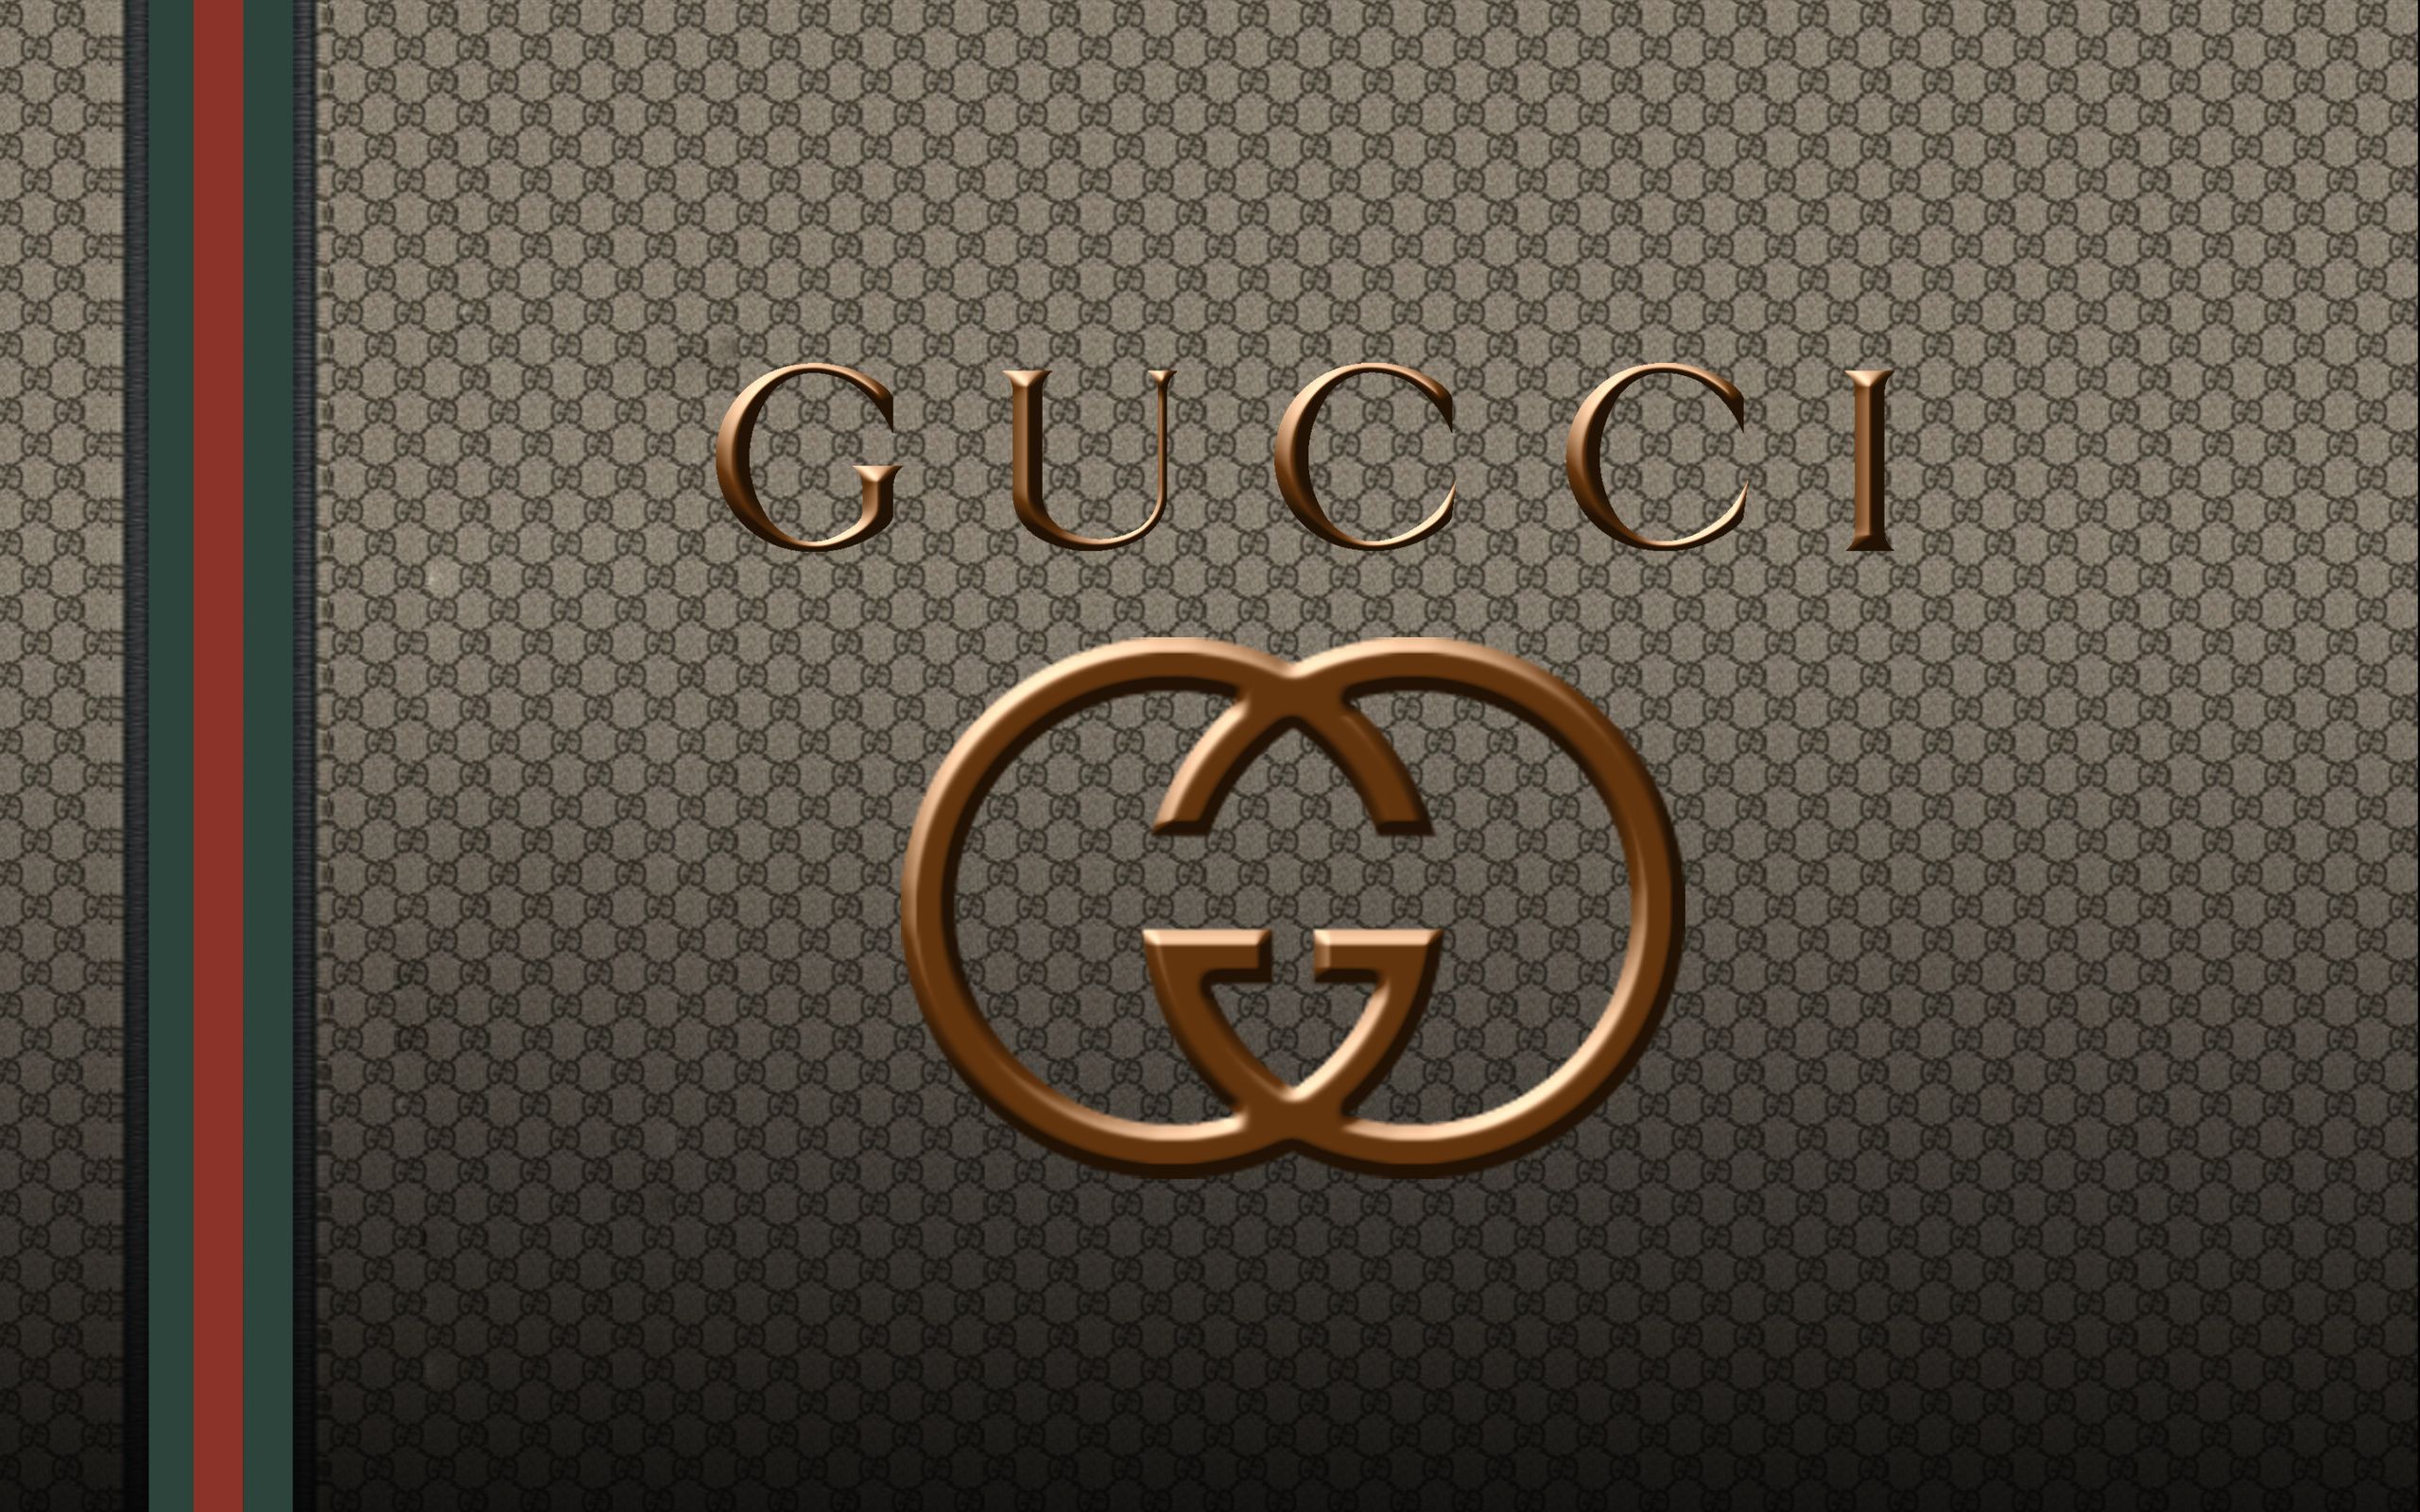 Products Gucci 2560x1600